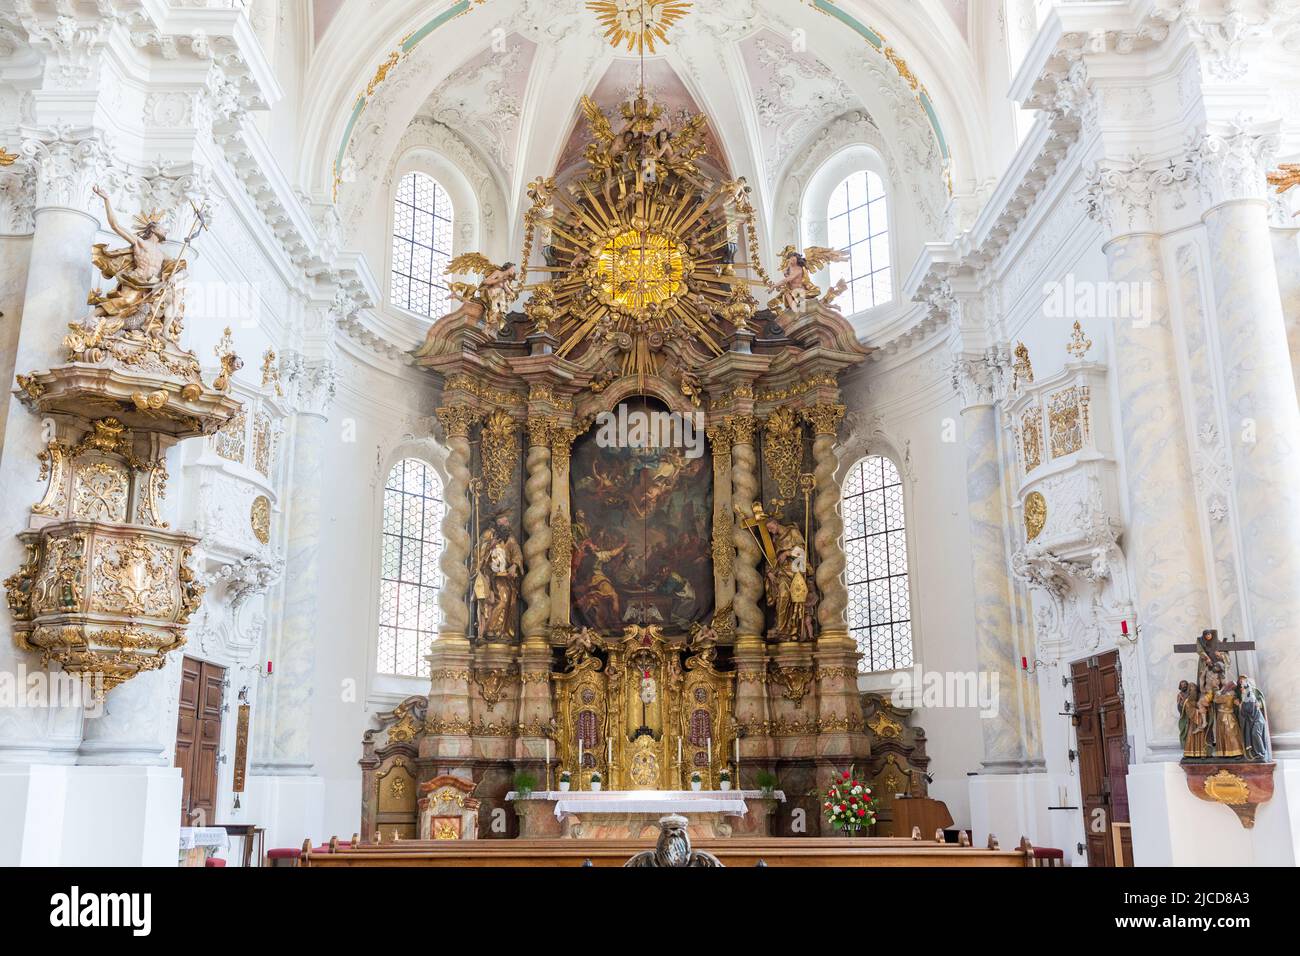 Landshut, Germany - Aug 15, 2021: View on the altar of the Abteikirche (abbey church) Seligenthal. Rococo style architecture. Stock Photo